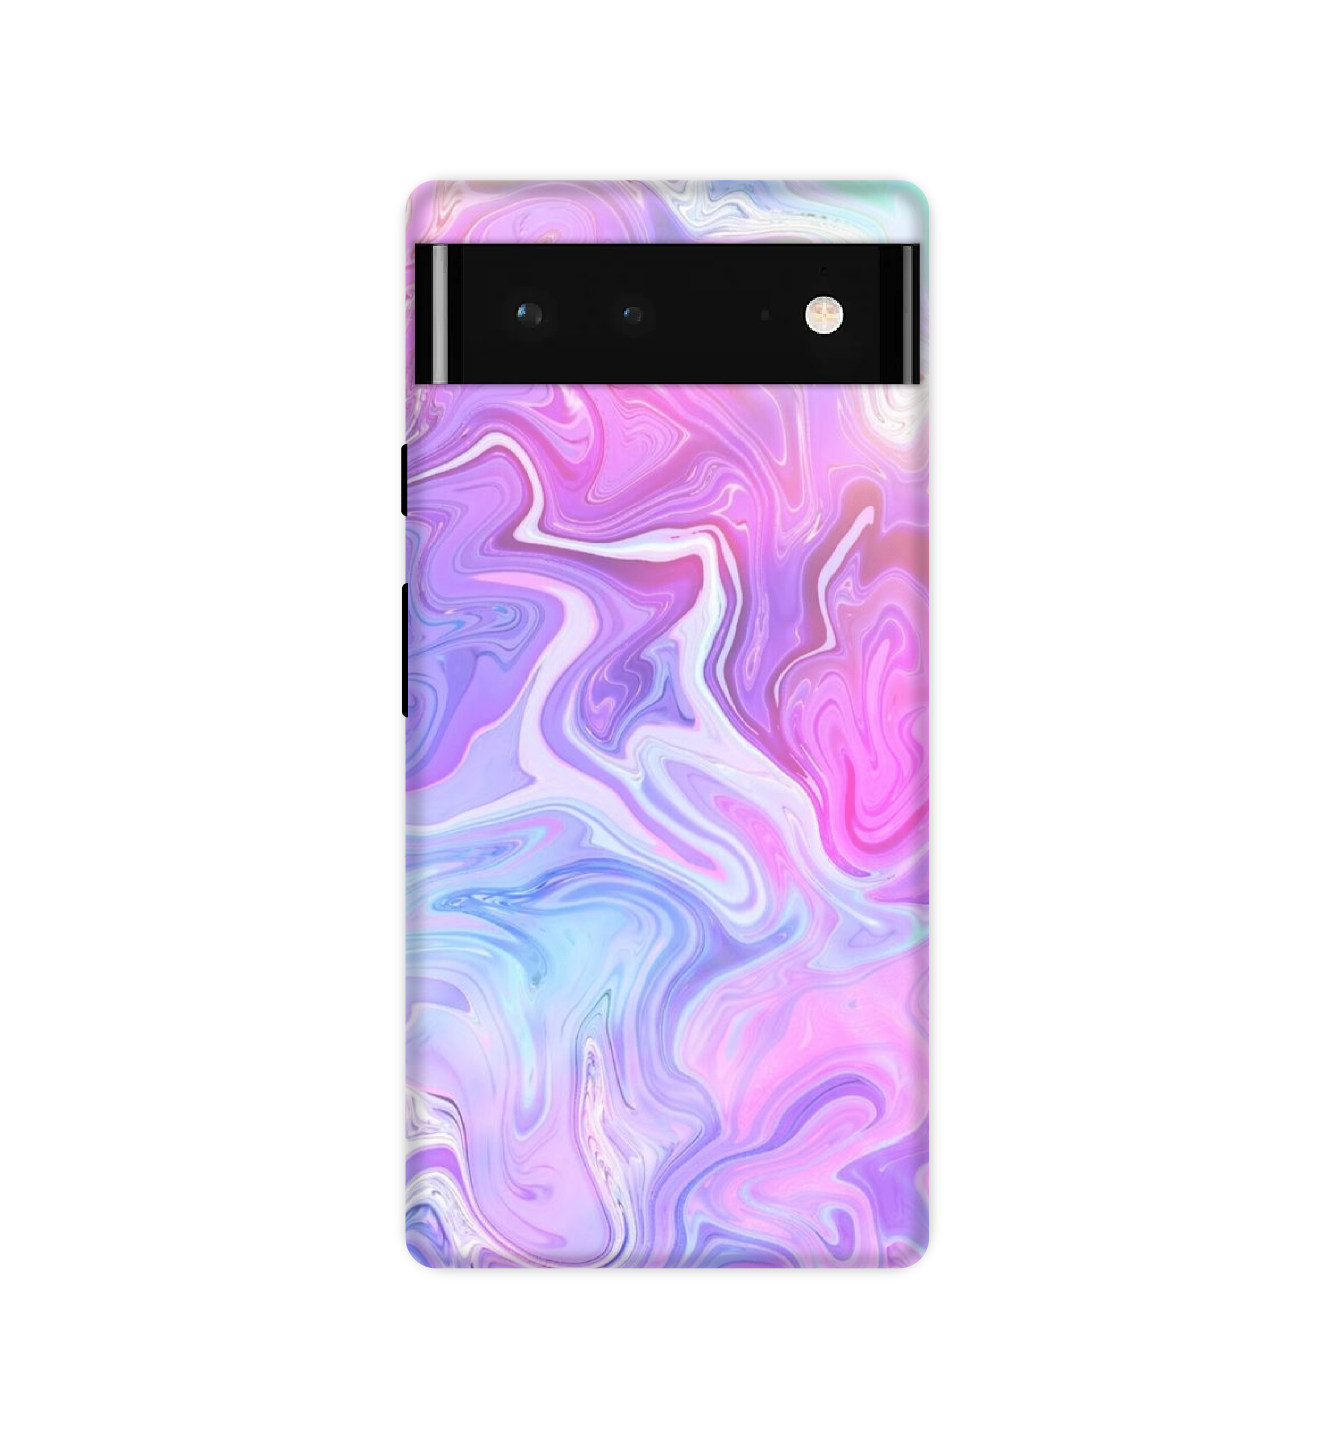 Unicorn Watermarble - Hard Cases For Google Models